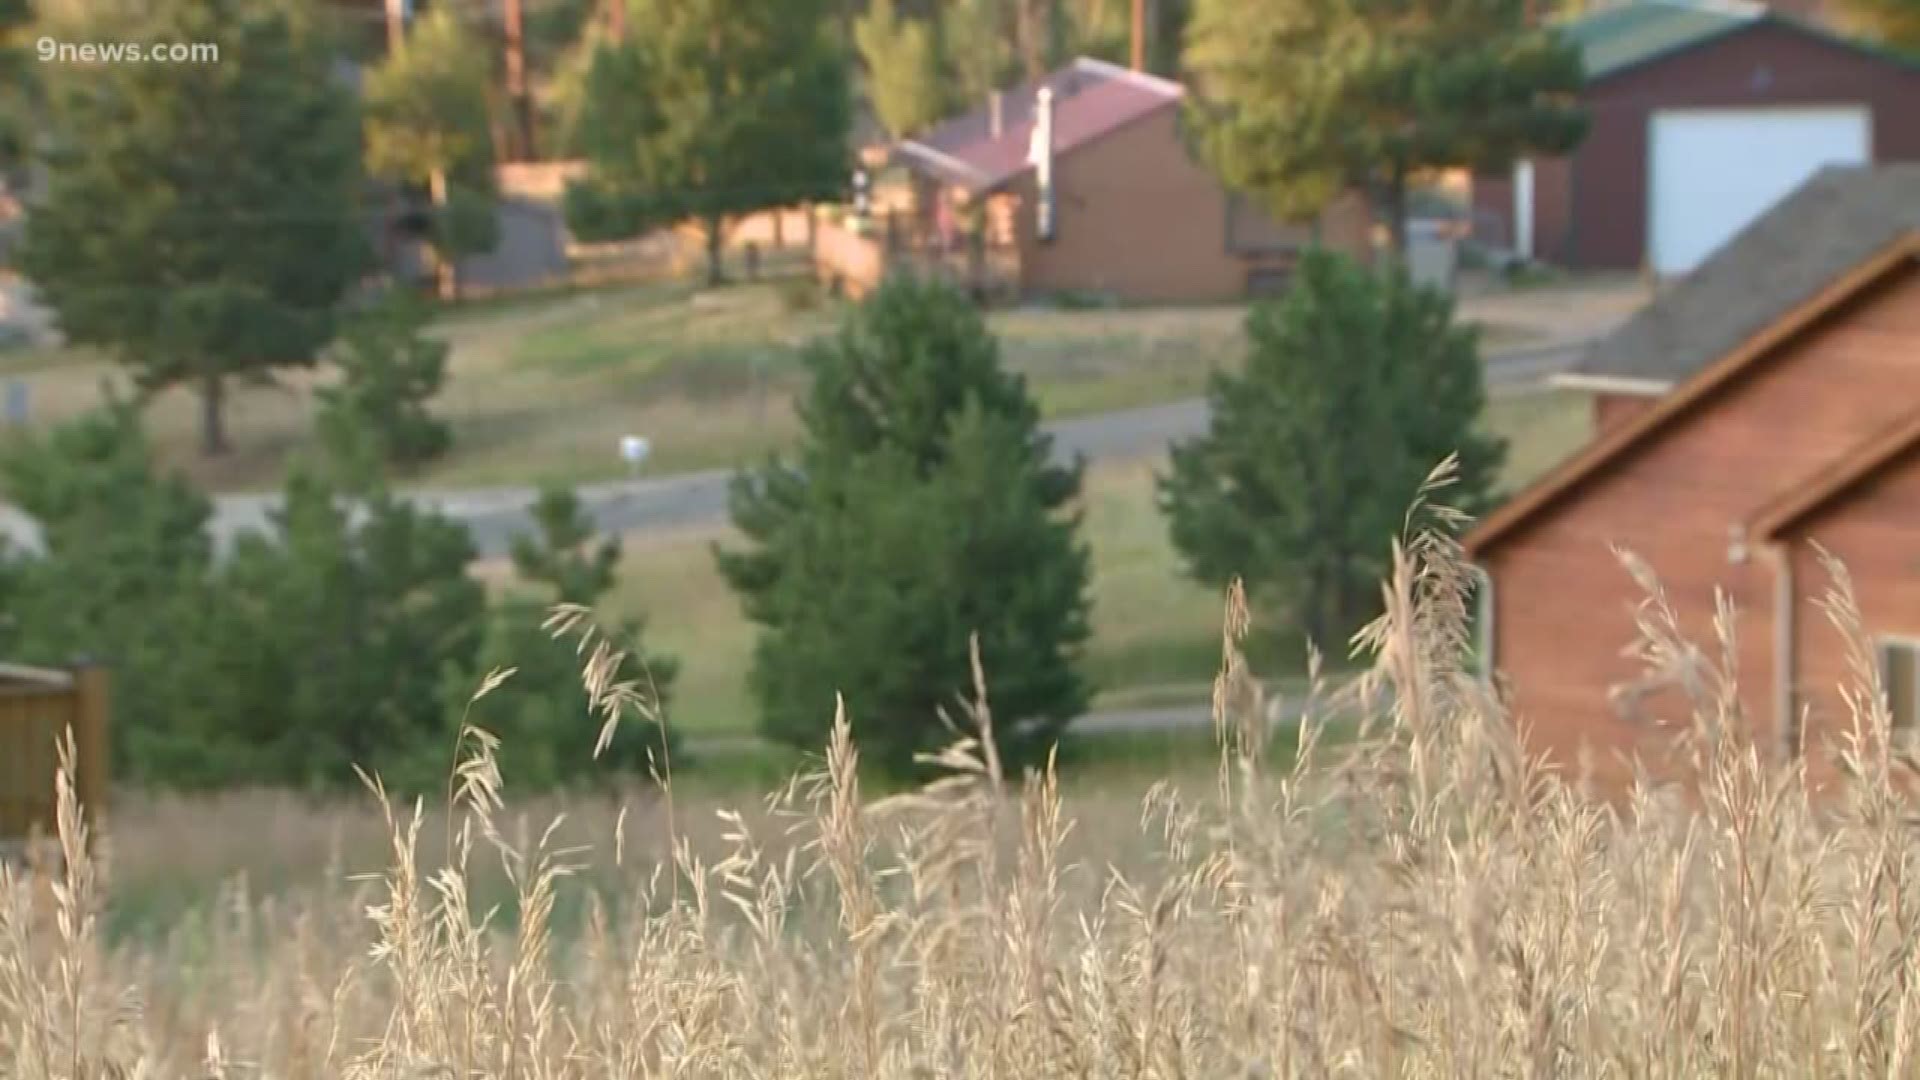 A mountain lion bit the boy's head in Burland subdivision as he ran to visit a friend, CPW said.